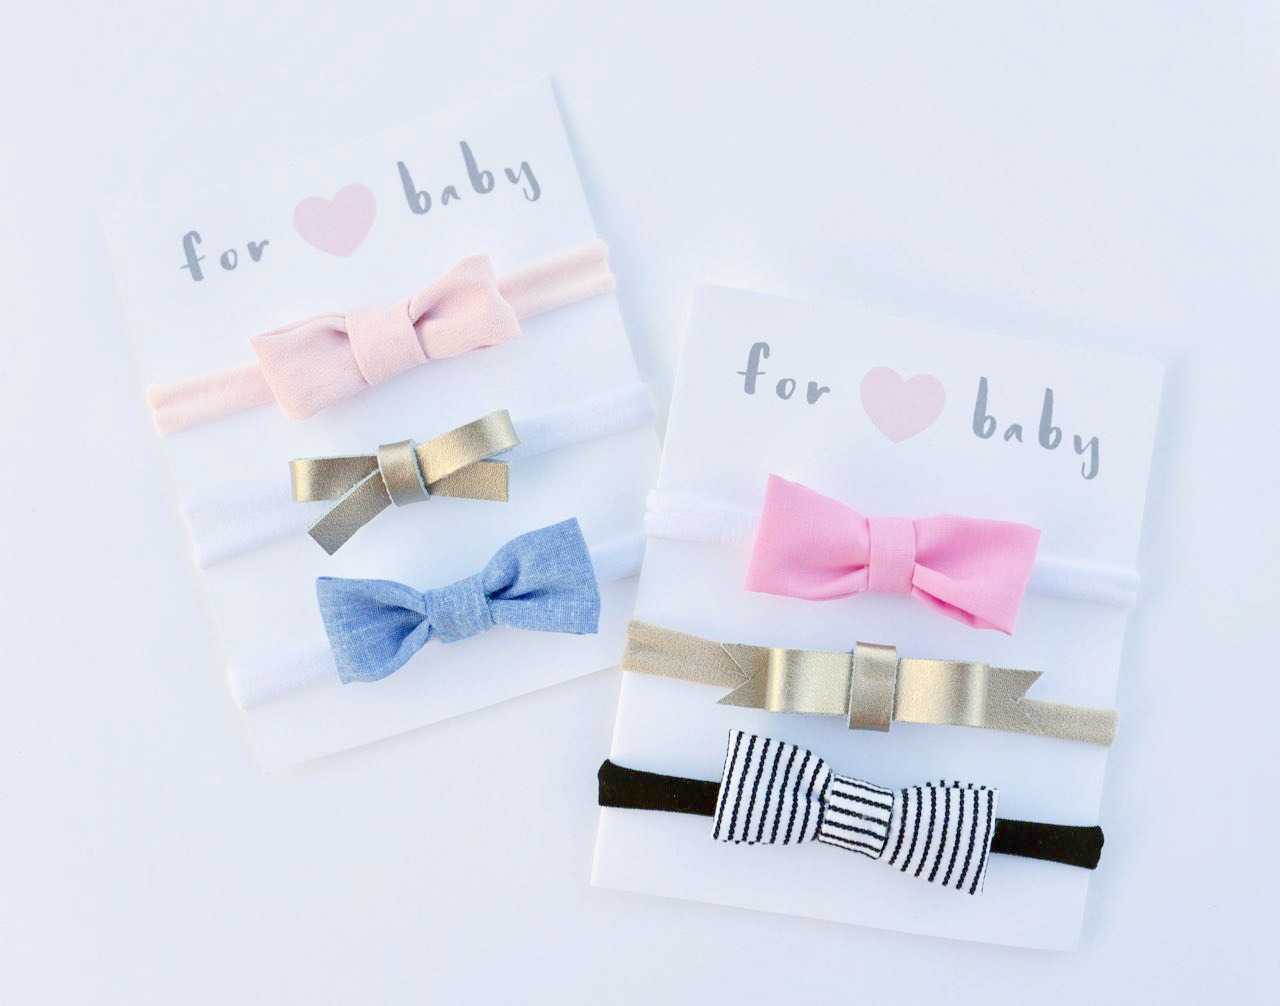 Free Printable Hair Bow Cards For Diy Hair Bows And With Regard To Headband Card Template